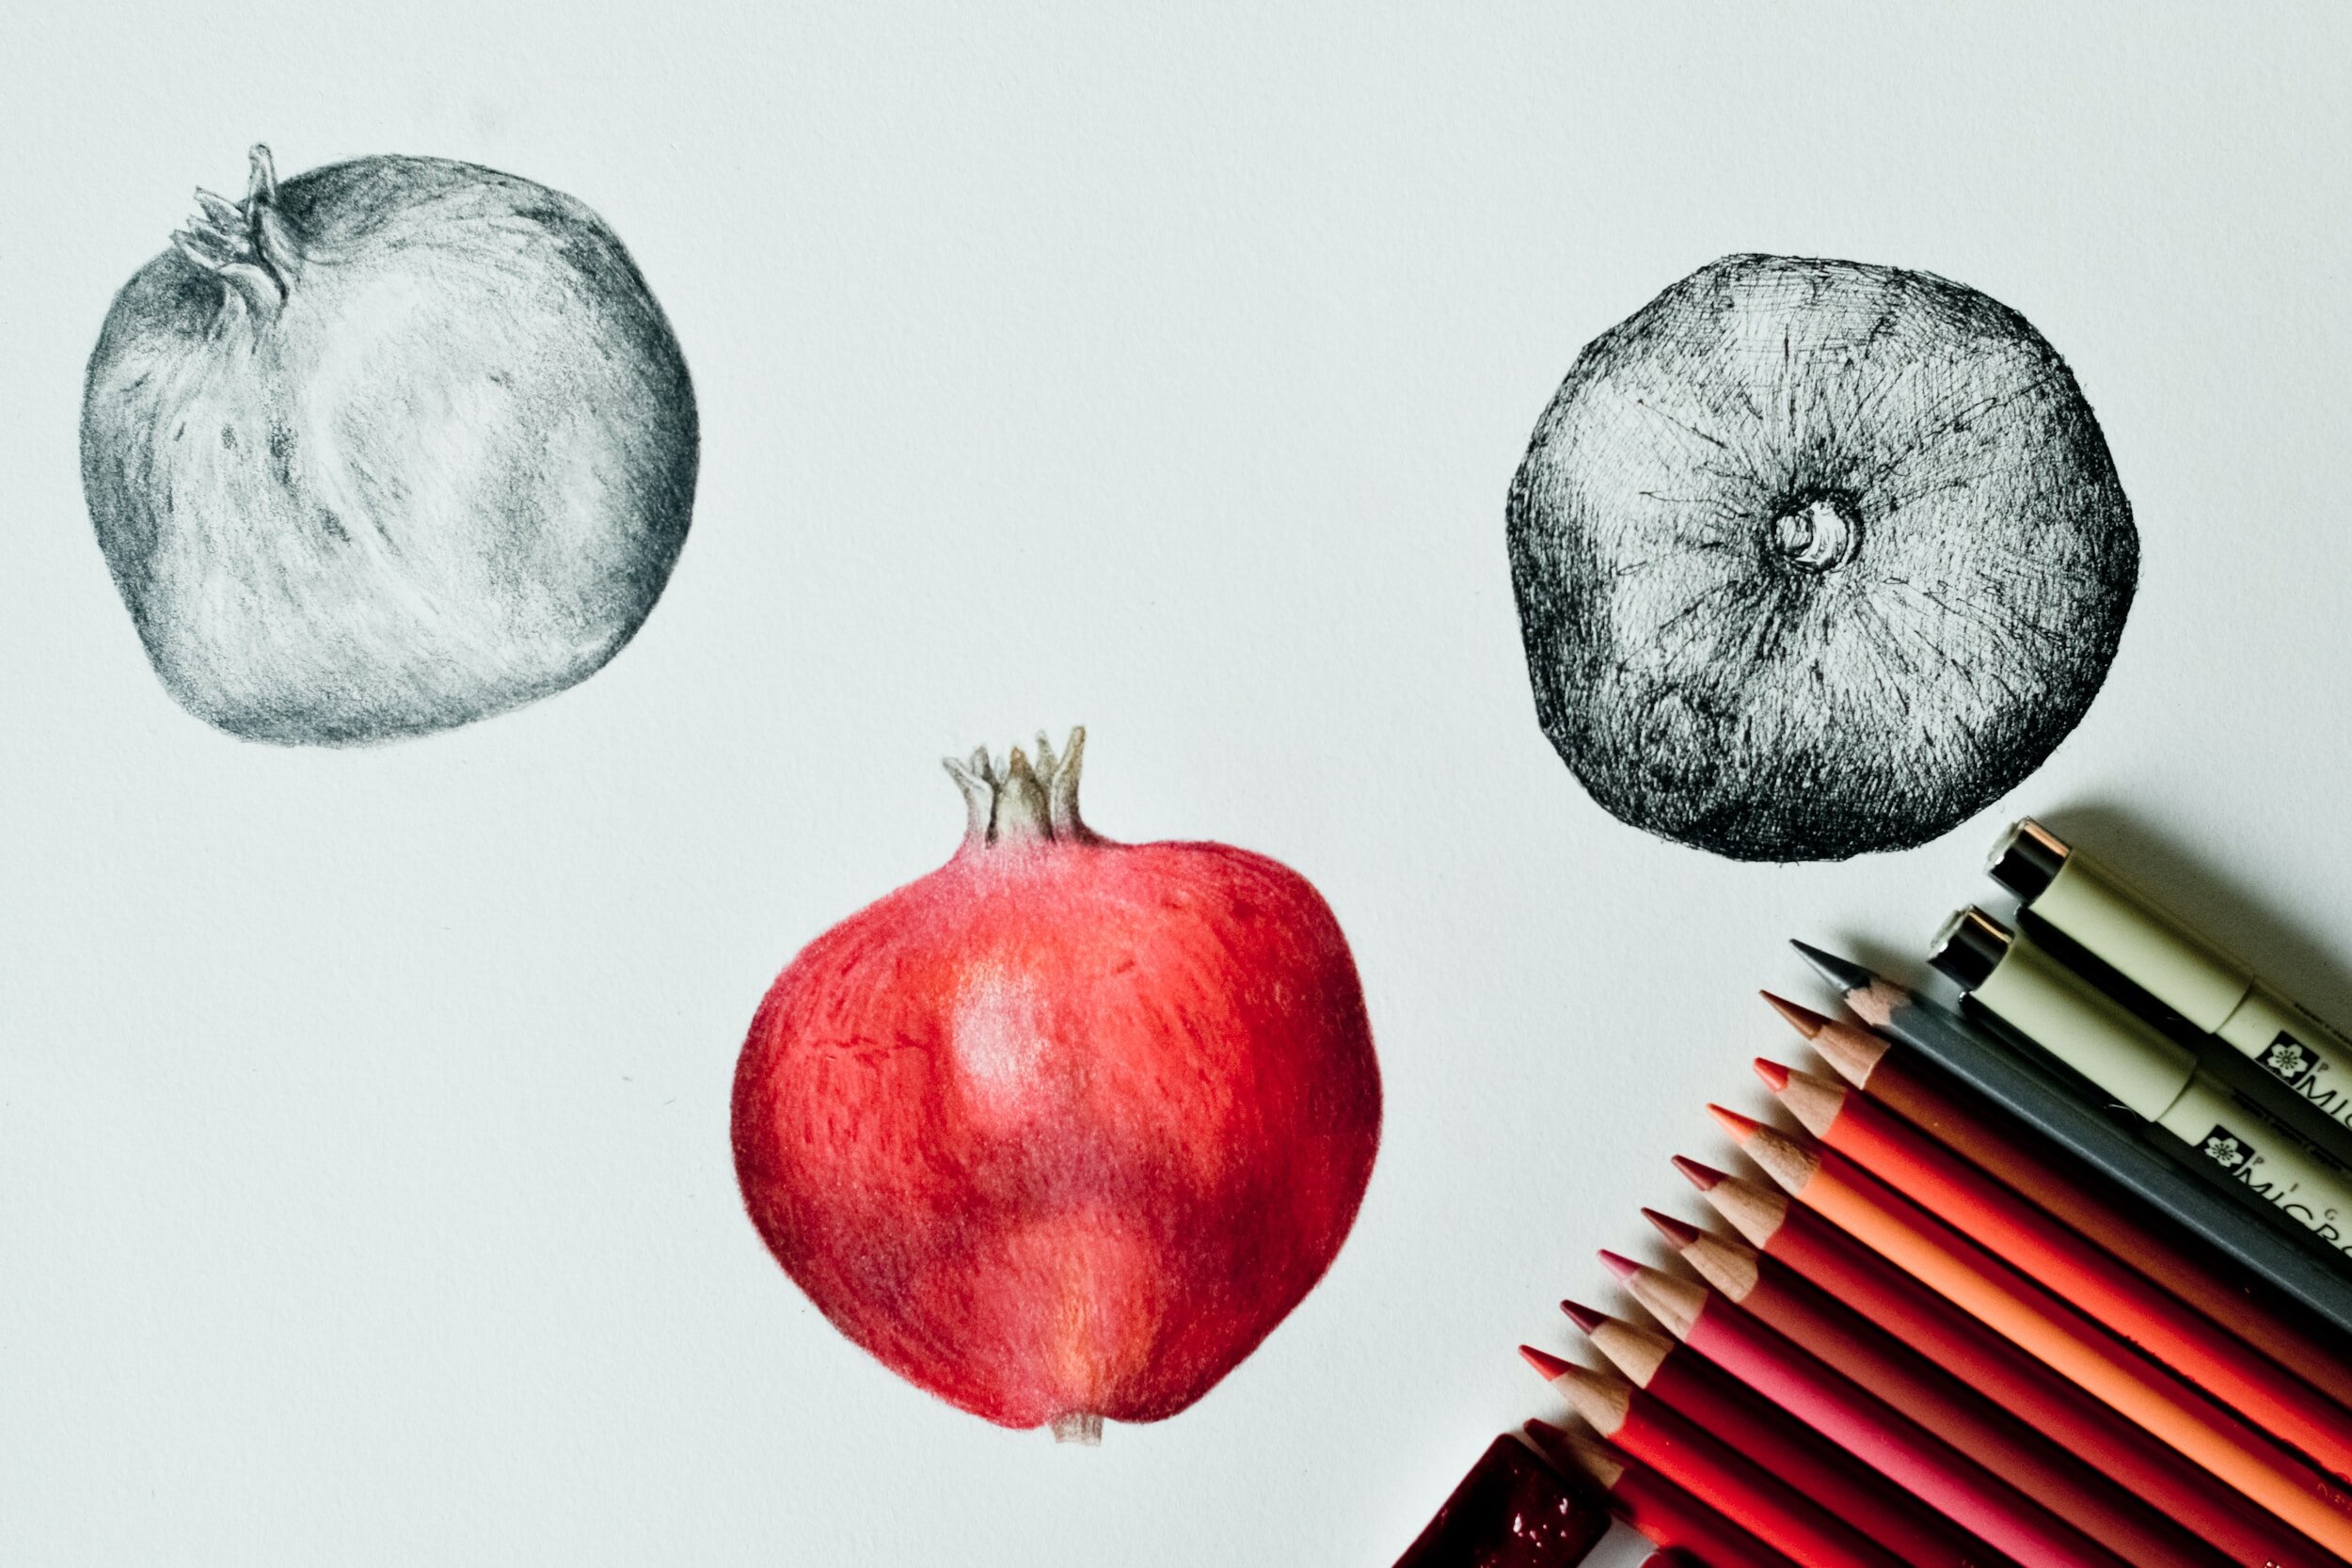 How to draw an apple | Apple Pencil Shading - YouTube